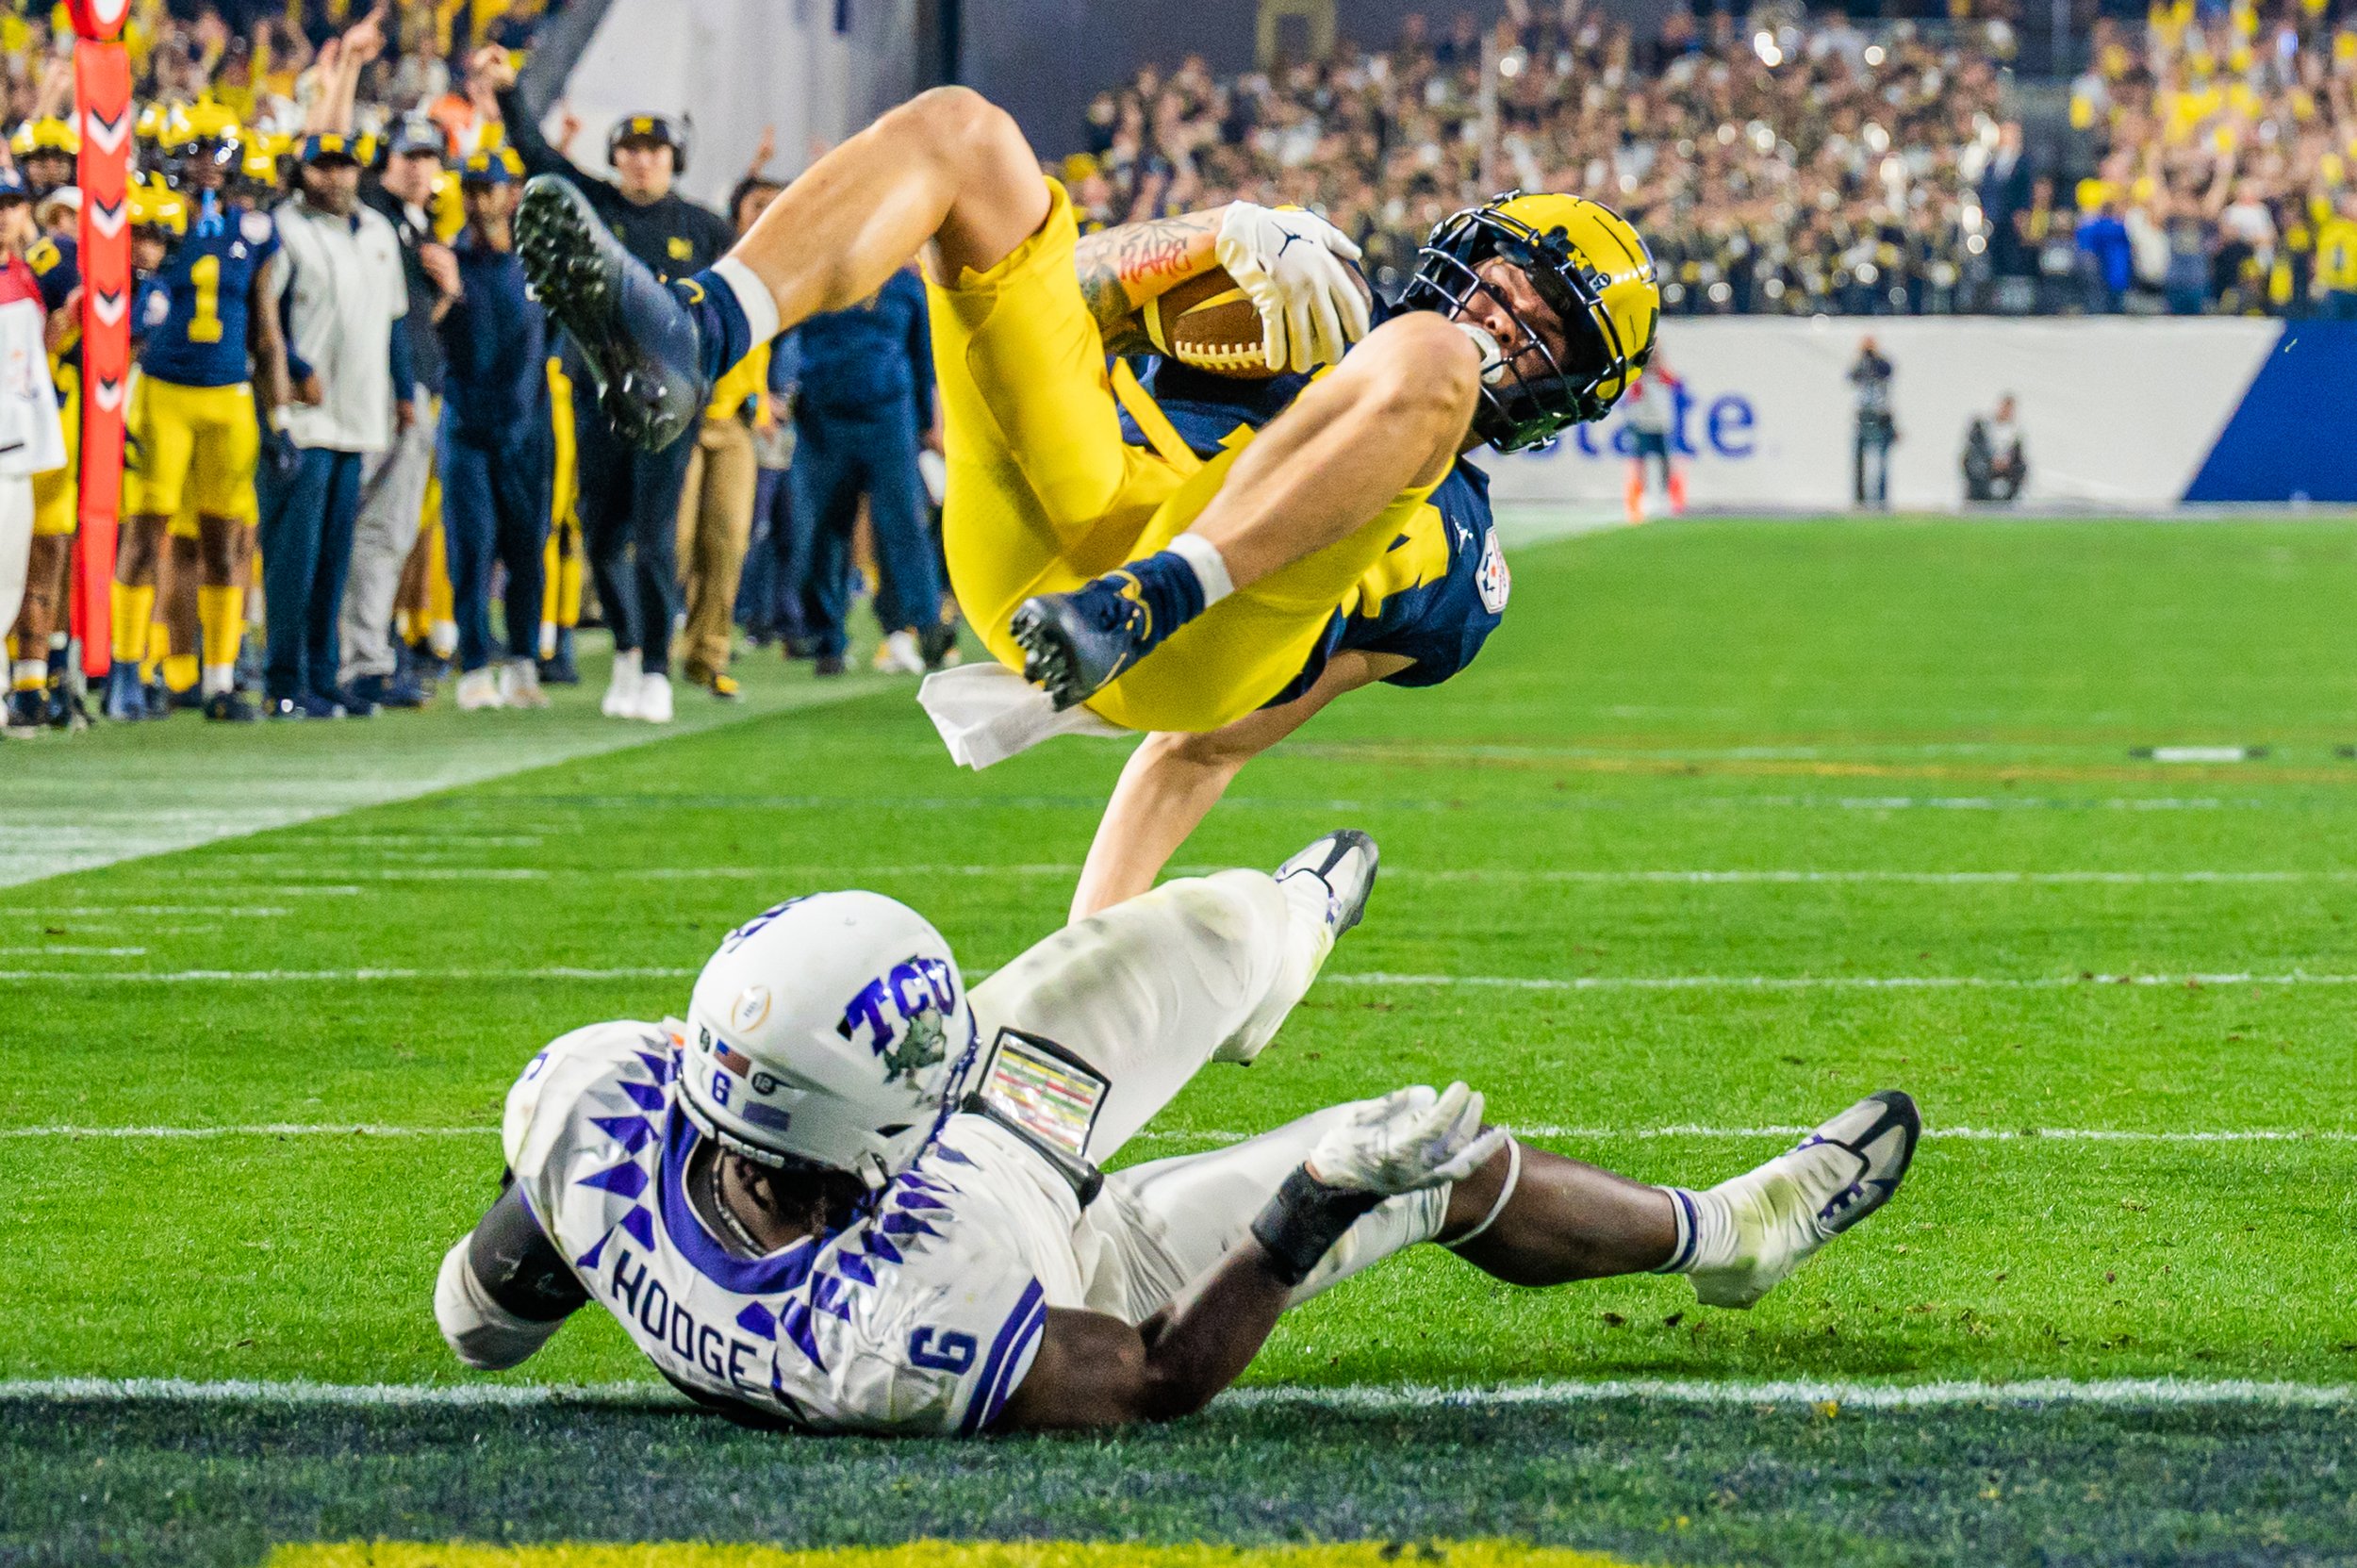  Roman Wilson (14) flips to score a touchdown against TCU at the Vrbo Fiesta Bowl College Football Playoff Semifinal in Glendale, Arizona on Saturday, December 31, 2022. Michigan would convert the 2-point conversion to make the score 41-38. Michigan 